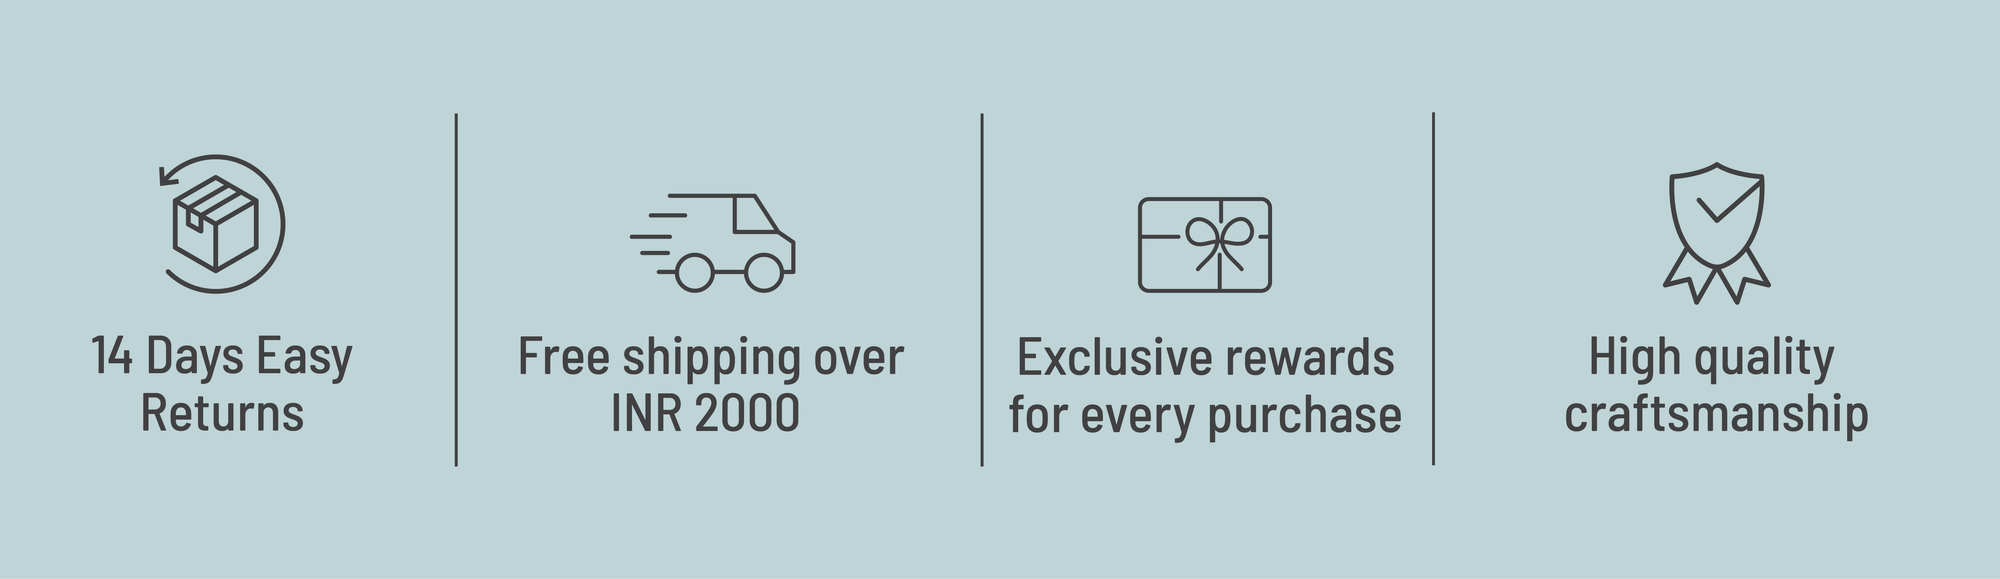 Image showing the USPs of the brand Tarinika which says: 14 day easy returns, Free shipping over INR 2000, Exclusive rewards for every purchase and High quality craftsmanship